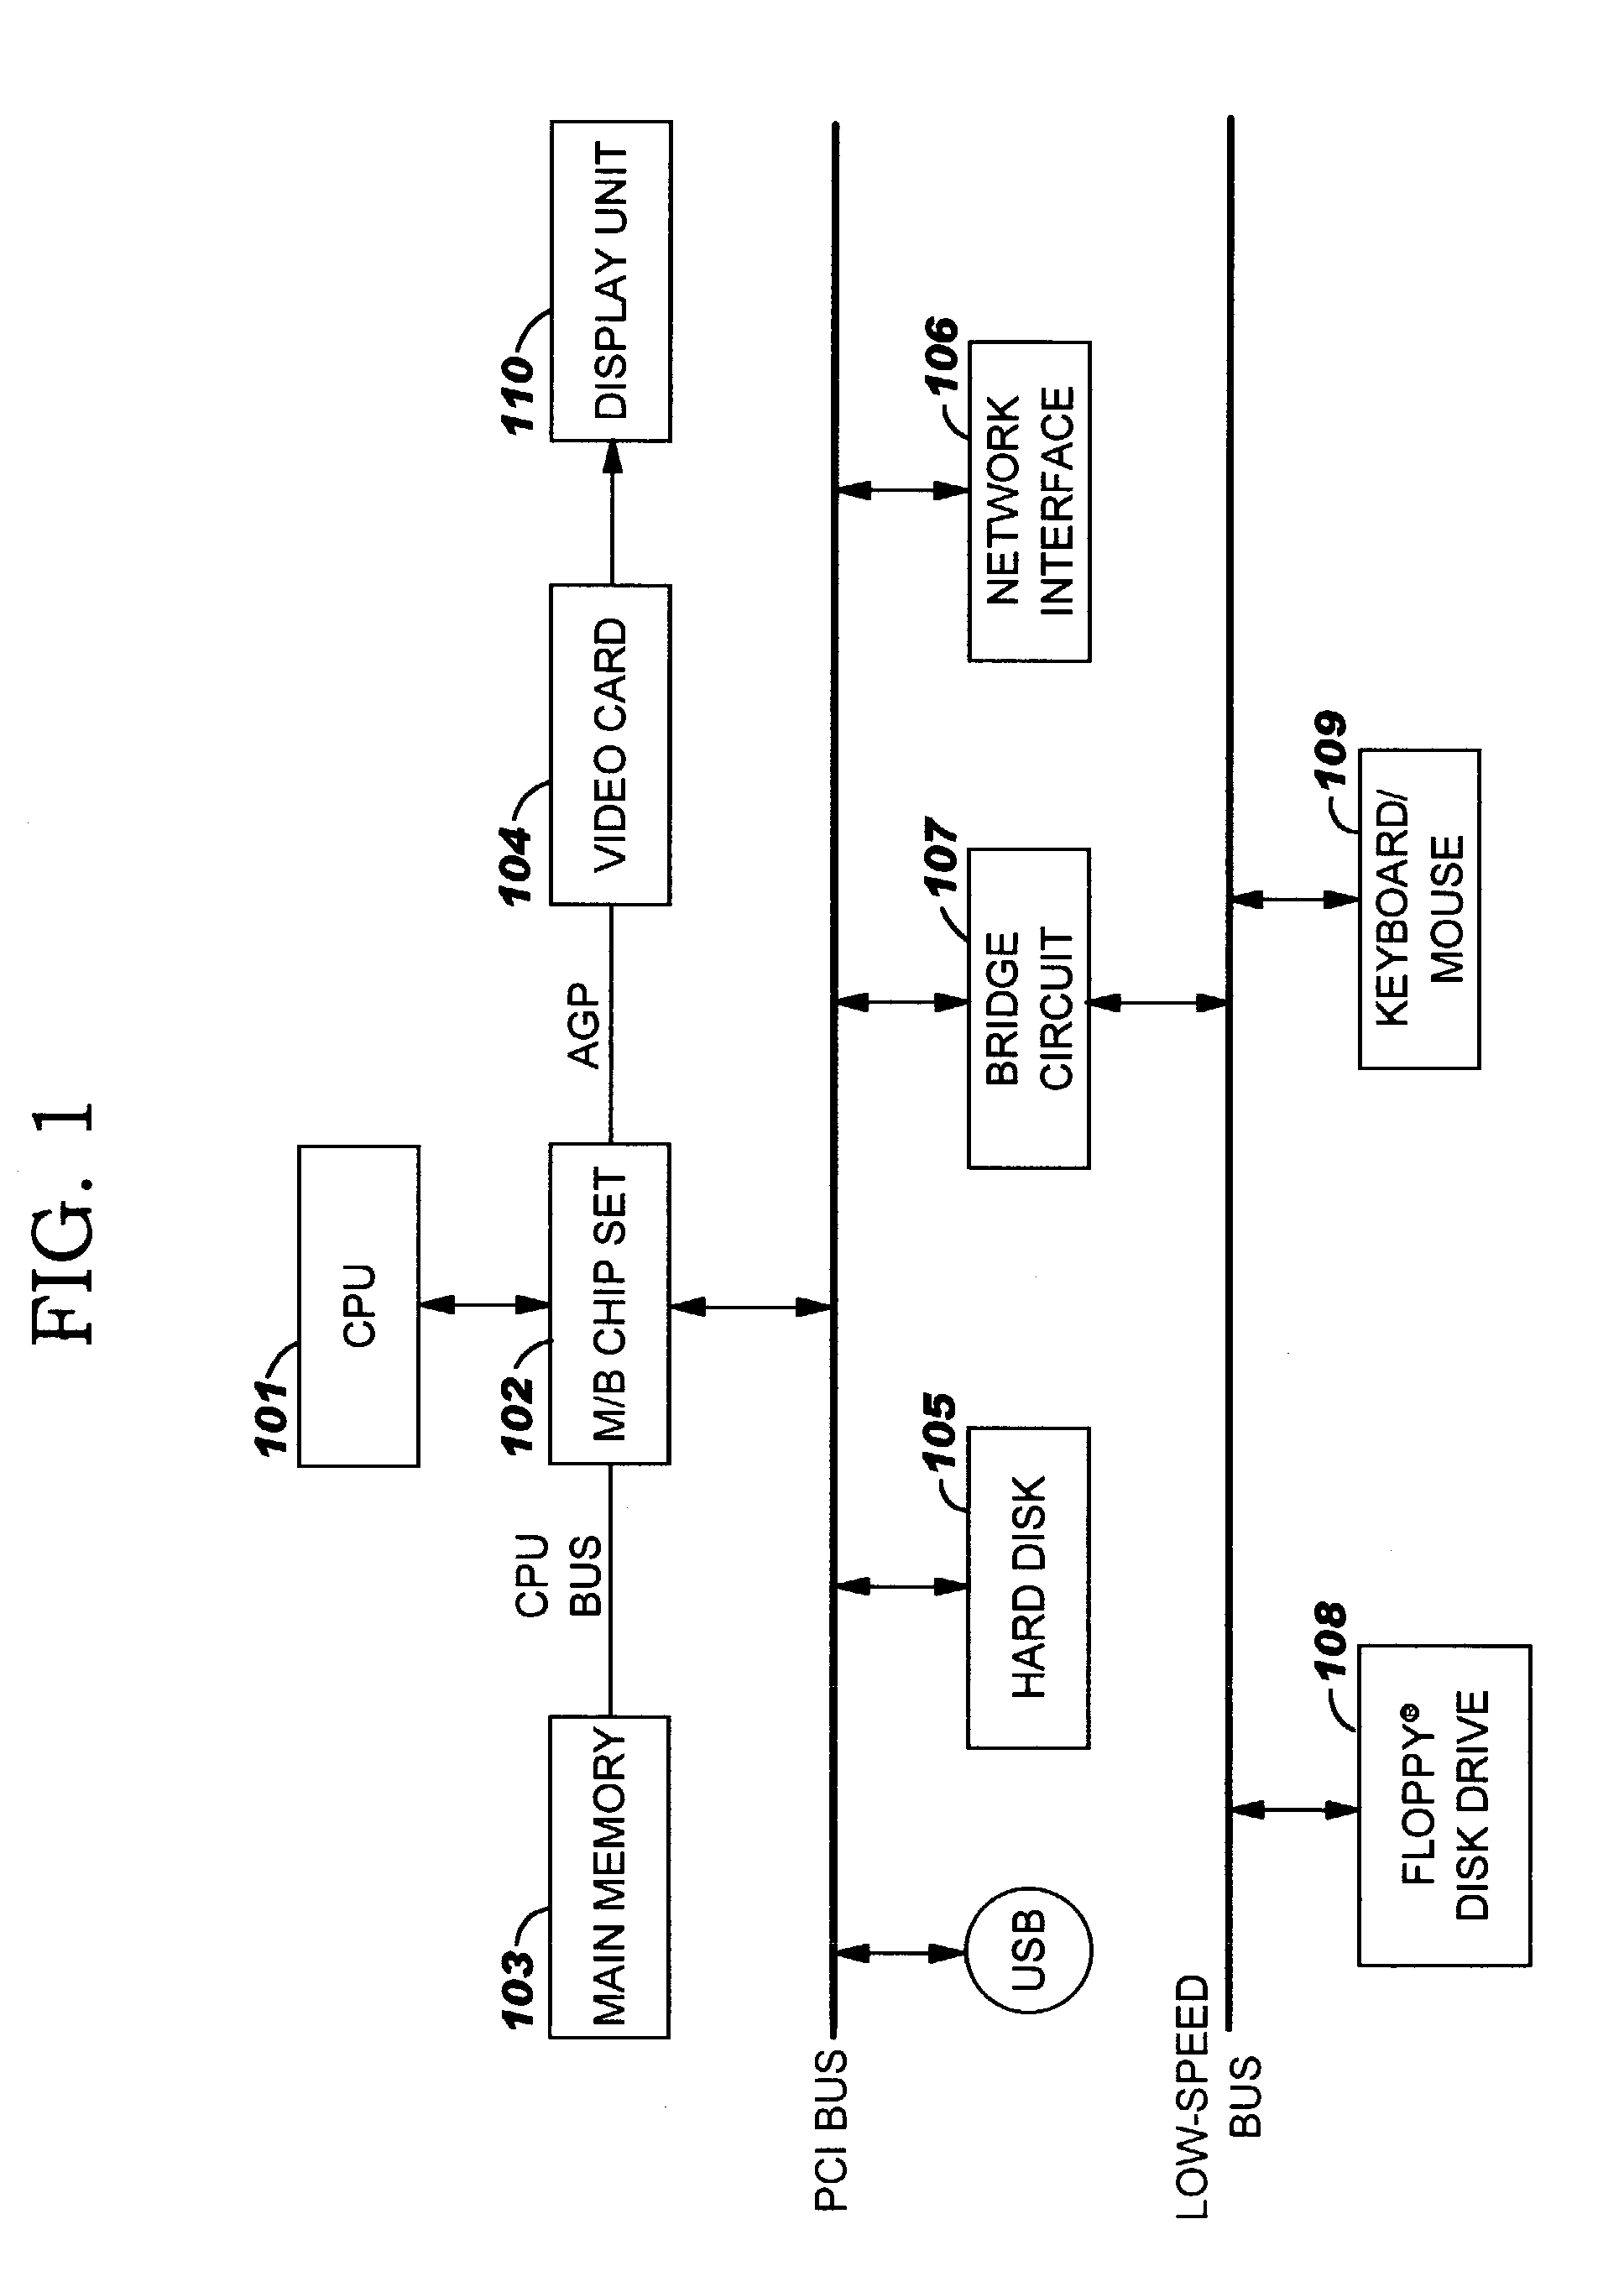 Display control method, program product, and information processing apparatus for controlling objects in a container based on the container's size